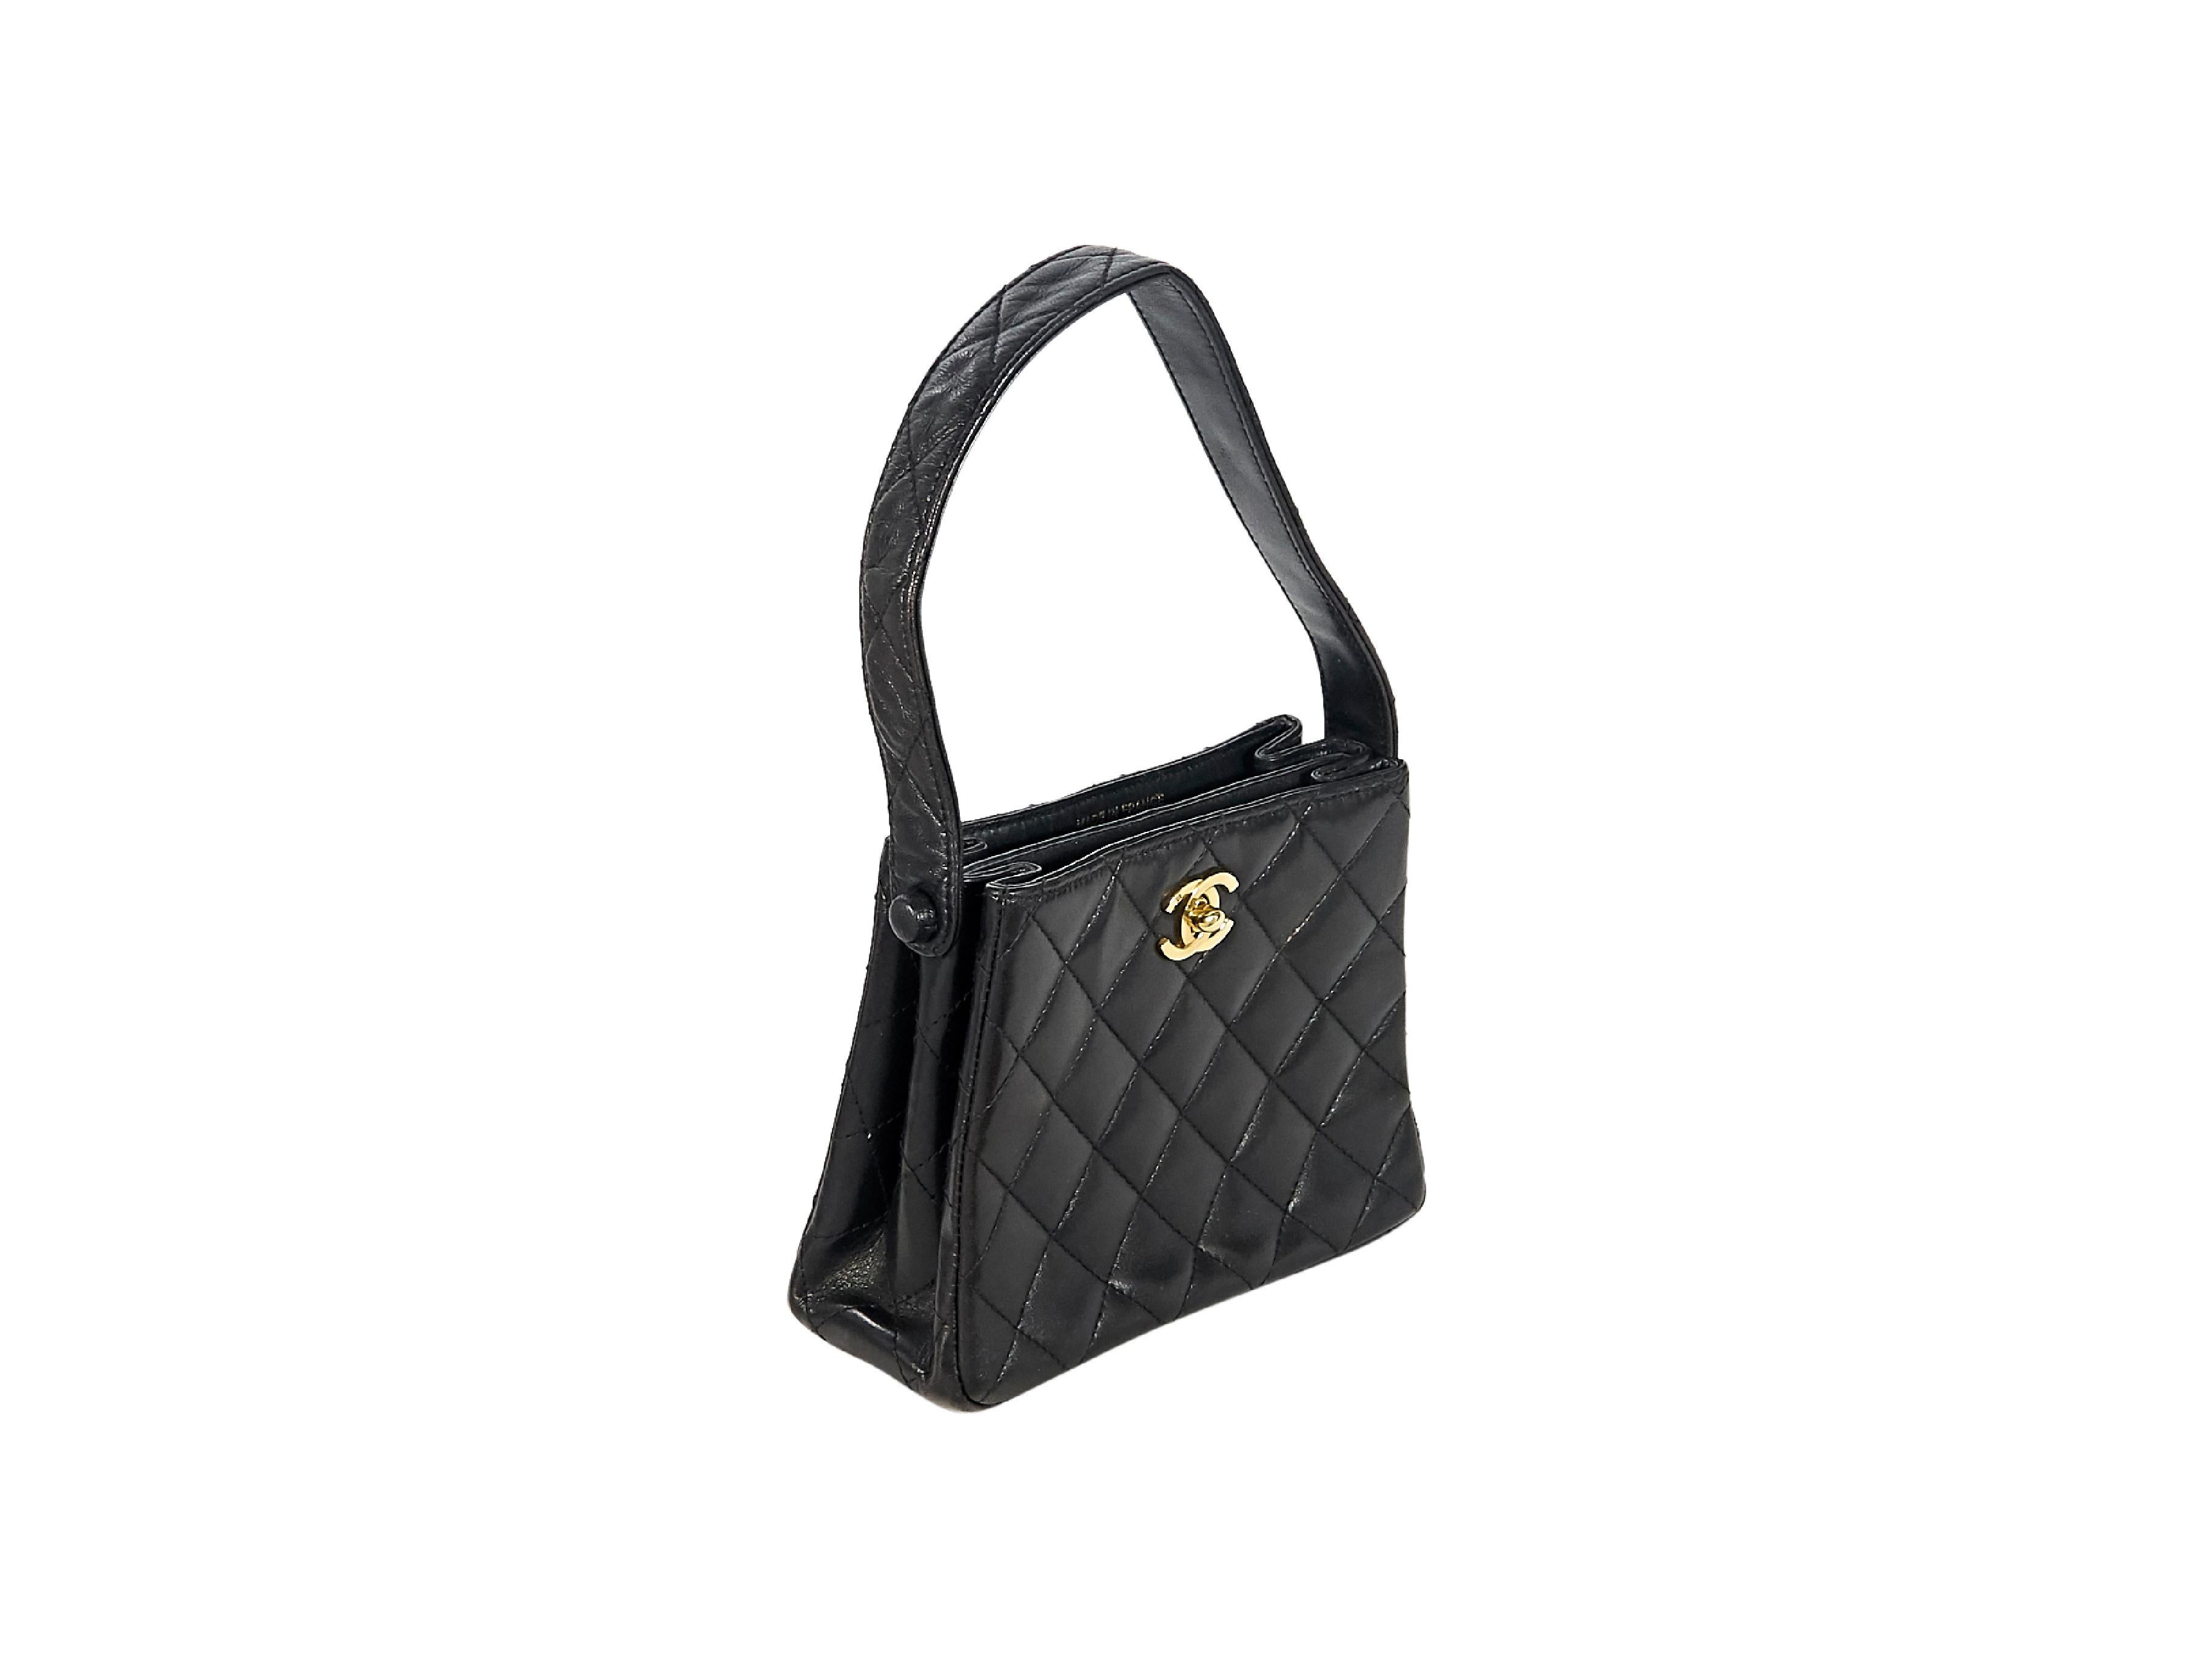 Product details:  Black quilted lambskin leather mini evening bag by Chanel.  Single shoulder strap.  Top twist-lock closure.  Leather interior with two compartments.  Goldtone hardware.  Authenticity card included.  6.5